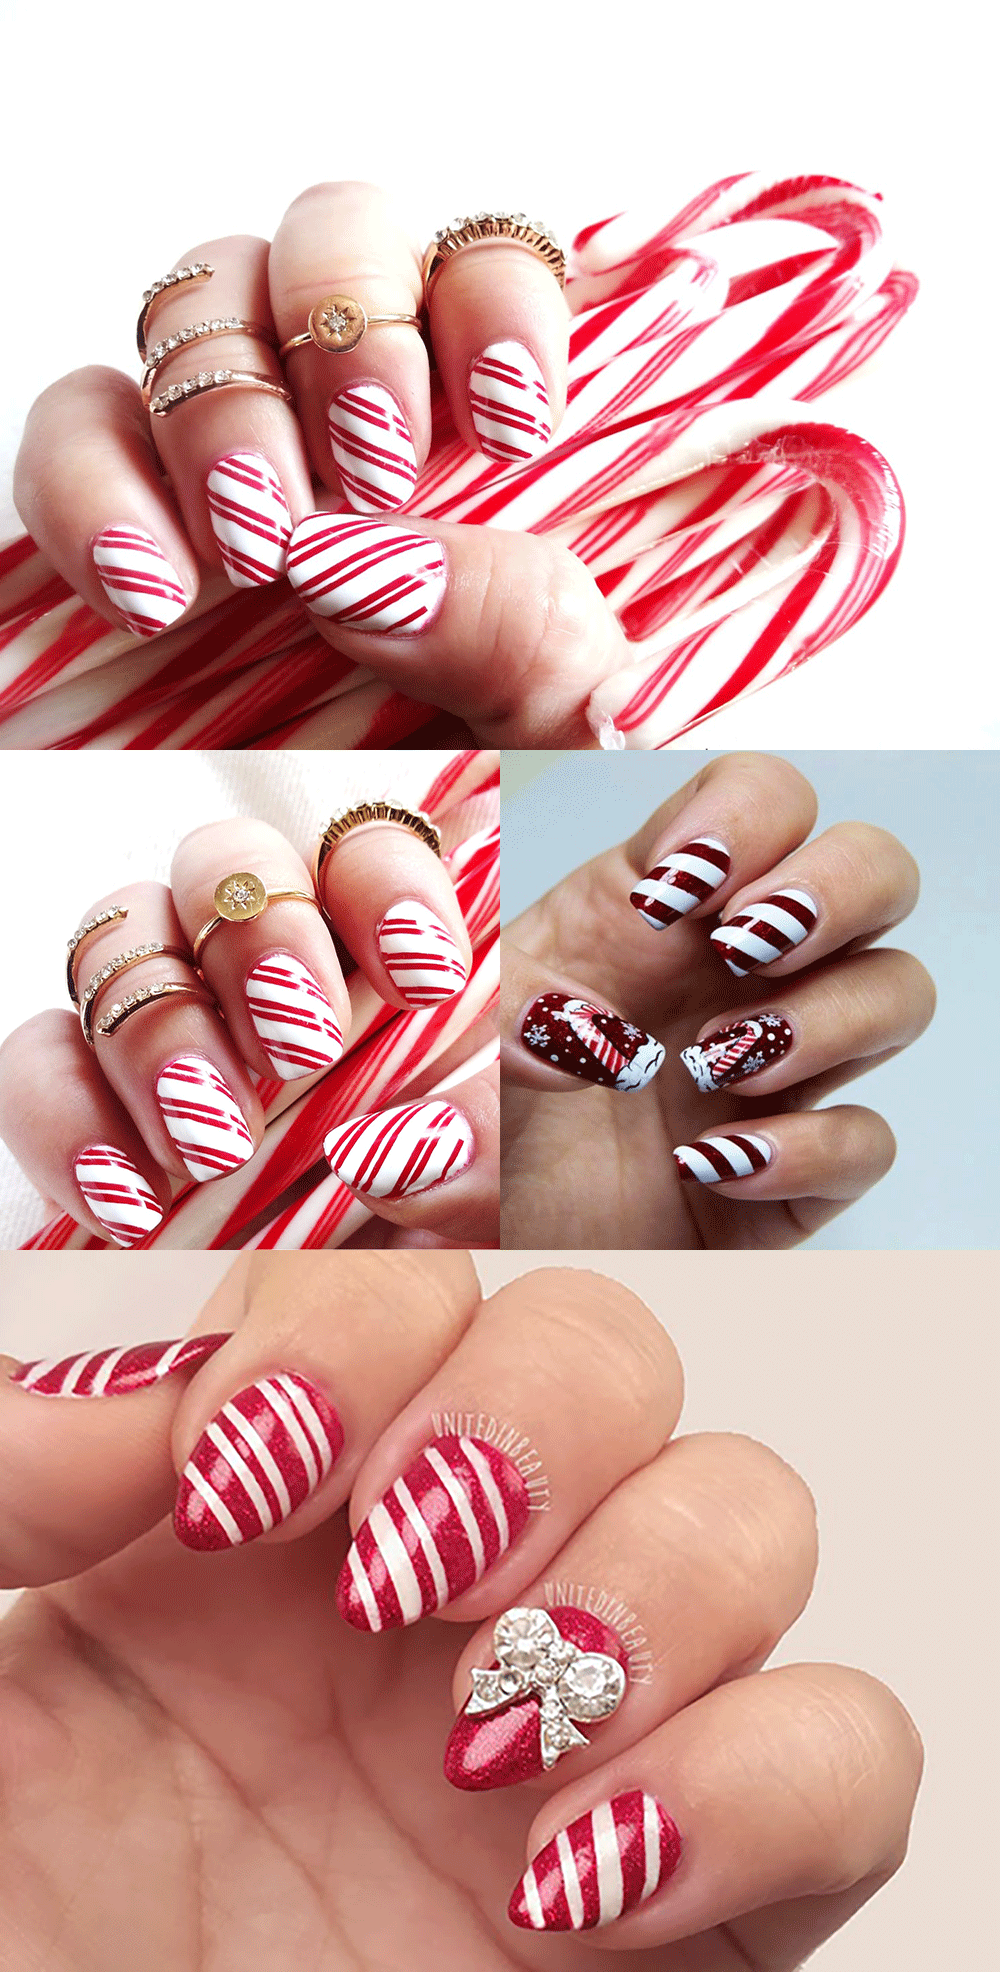 Candy Cane Nail Art Designs are always awesome